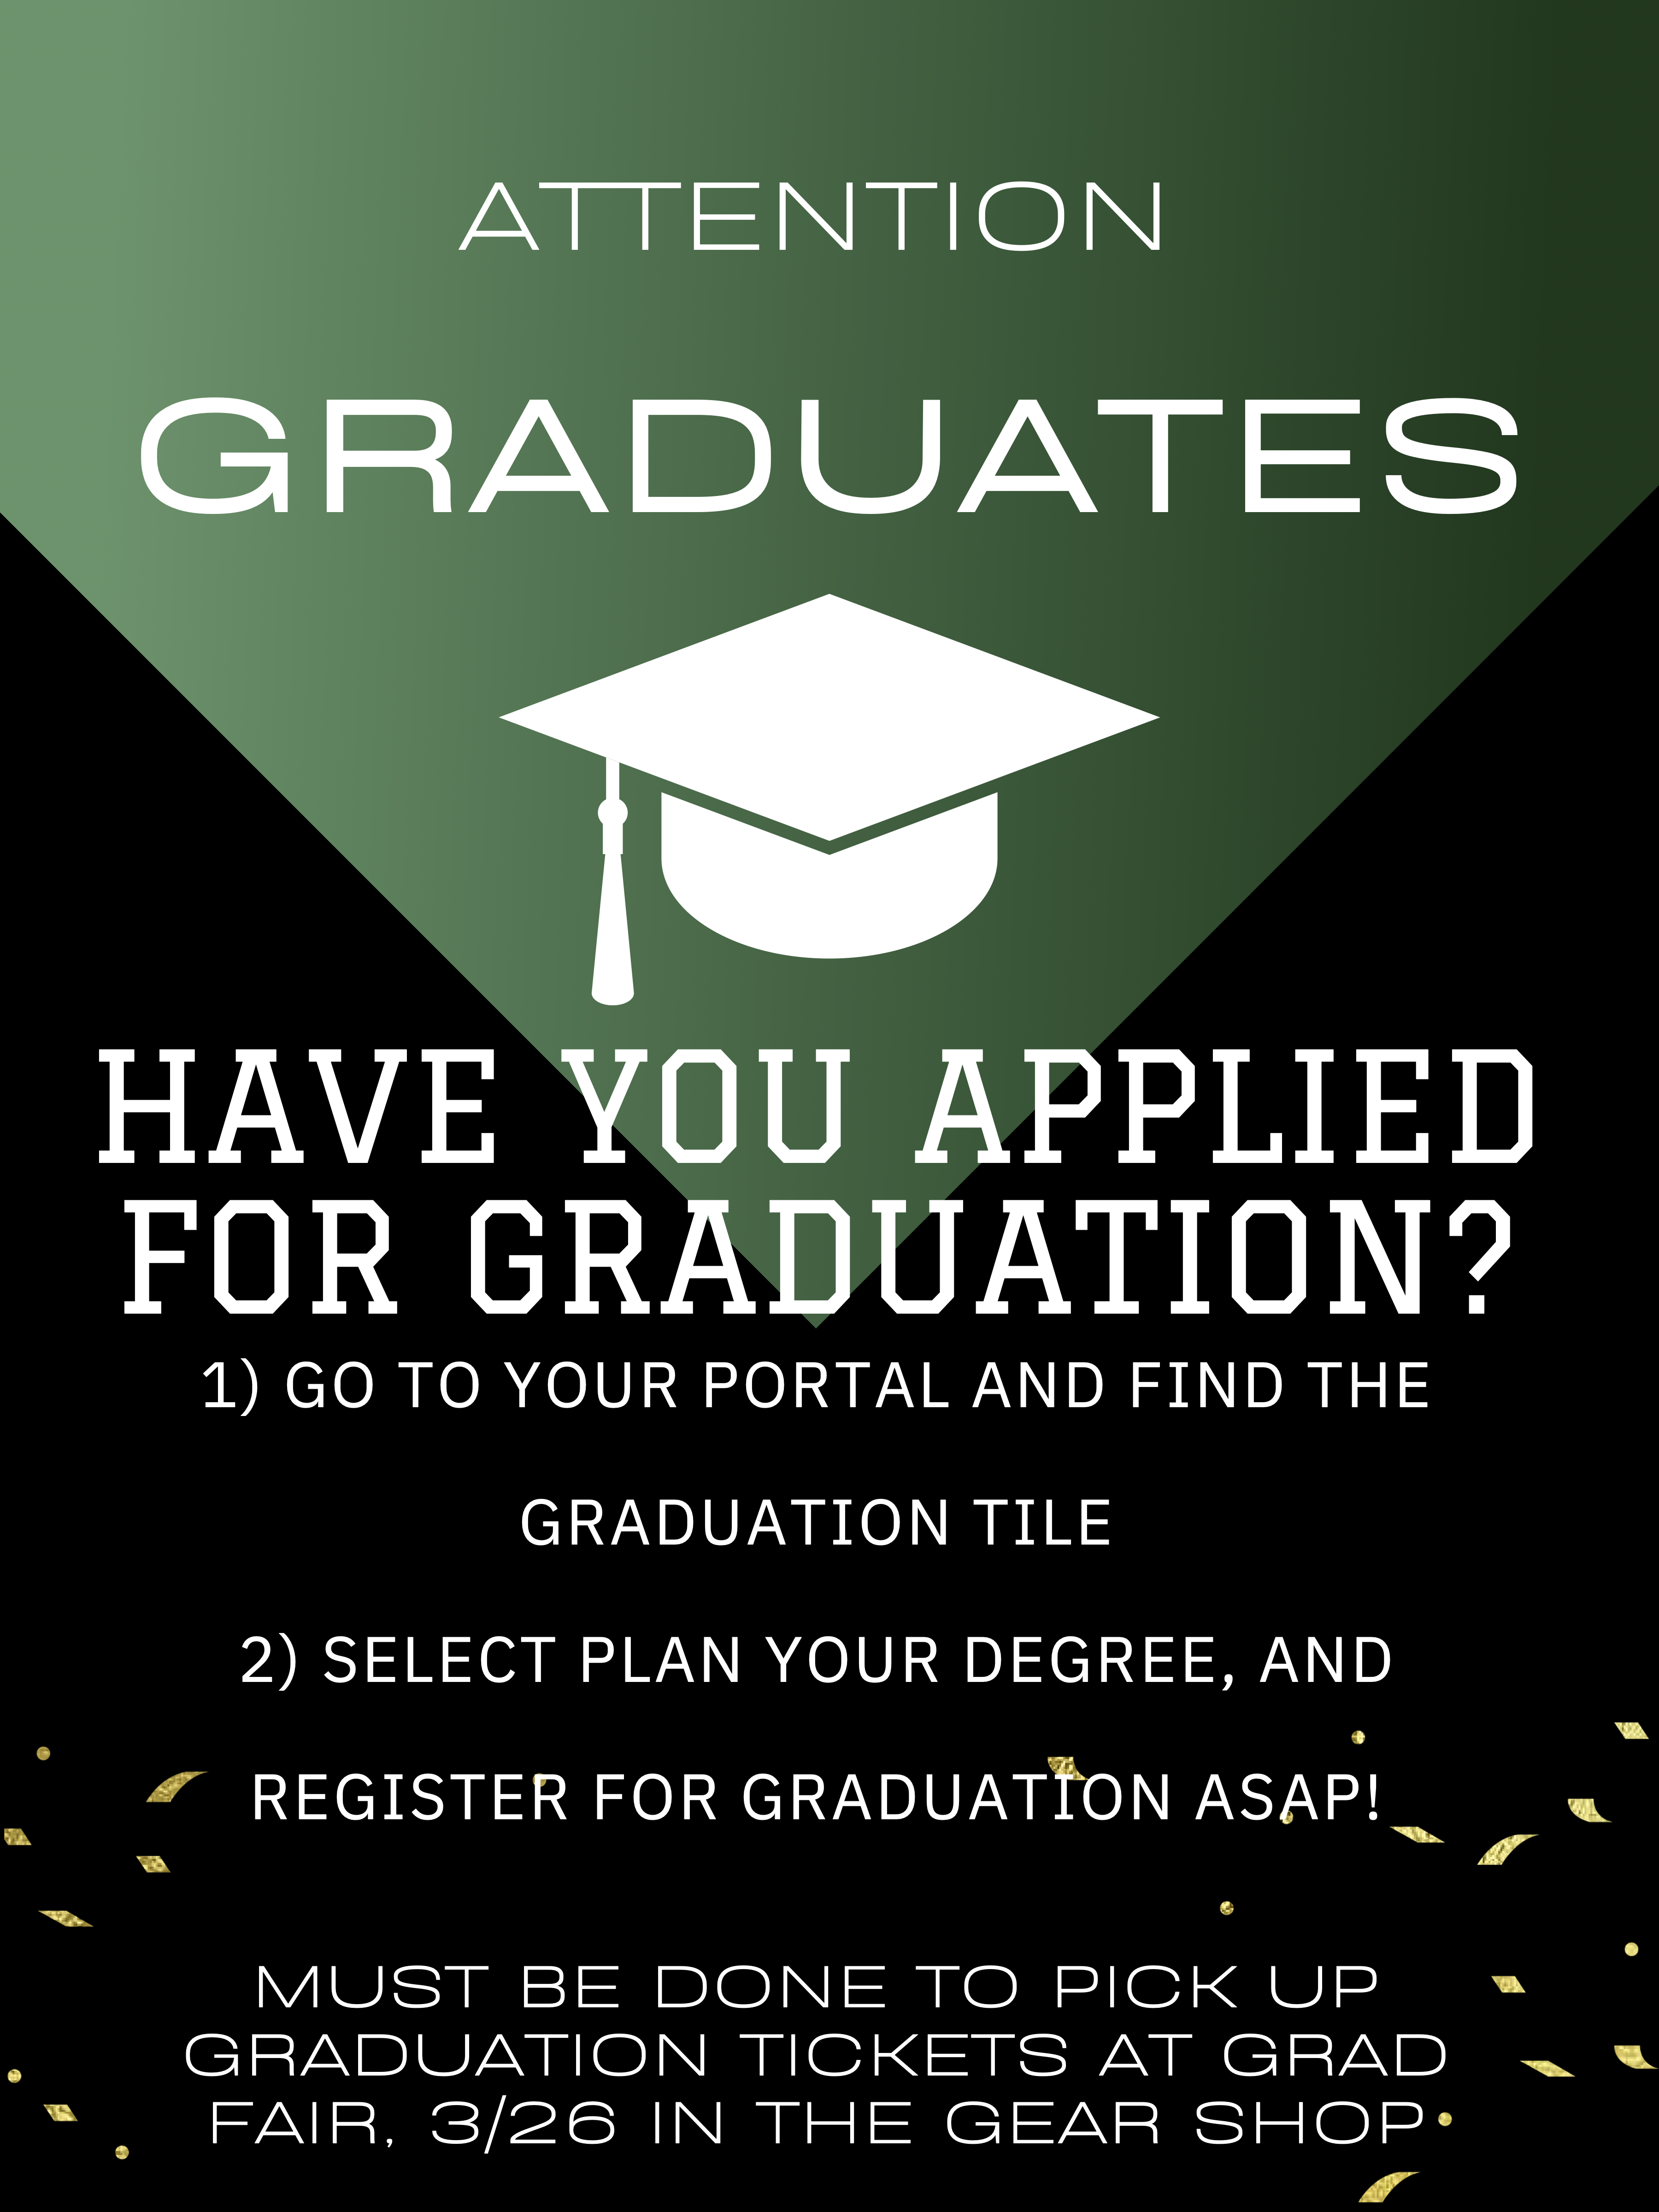 Greetings Graduating Seniors!

Have you applied for Graduation?

Please:

1) Go to your Portal and find the Graduation Tile

2) Select Plan Your Degree and register for Graduation ASAP!

That's not all!

There is good news for you!

 The Commencement Website is up and running. You can find answers to all of your questions there, including:

-How many tickets do I get? 

-When can I pick up my tickets? 

-When and where do I order my regalia? 

This is being updated on the website soon, but in the meantime, you can follow this link to order: https://www.buildagrad.com/vsu

And so much more! 

There will also be a Grad Fair on March 26th in the college store. There will be surprises and fun, and you can pick up your tickets and regalia that day.

Congratulations, everyone!